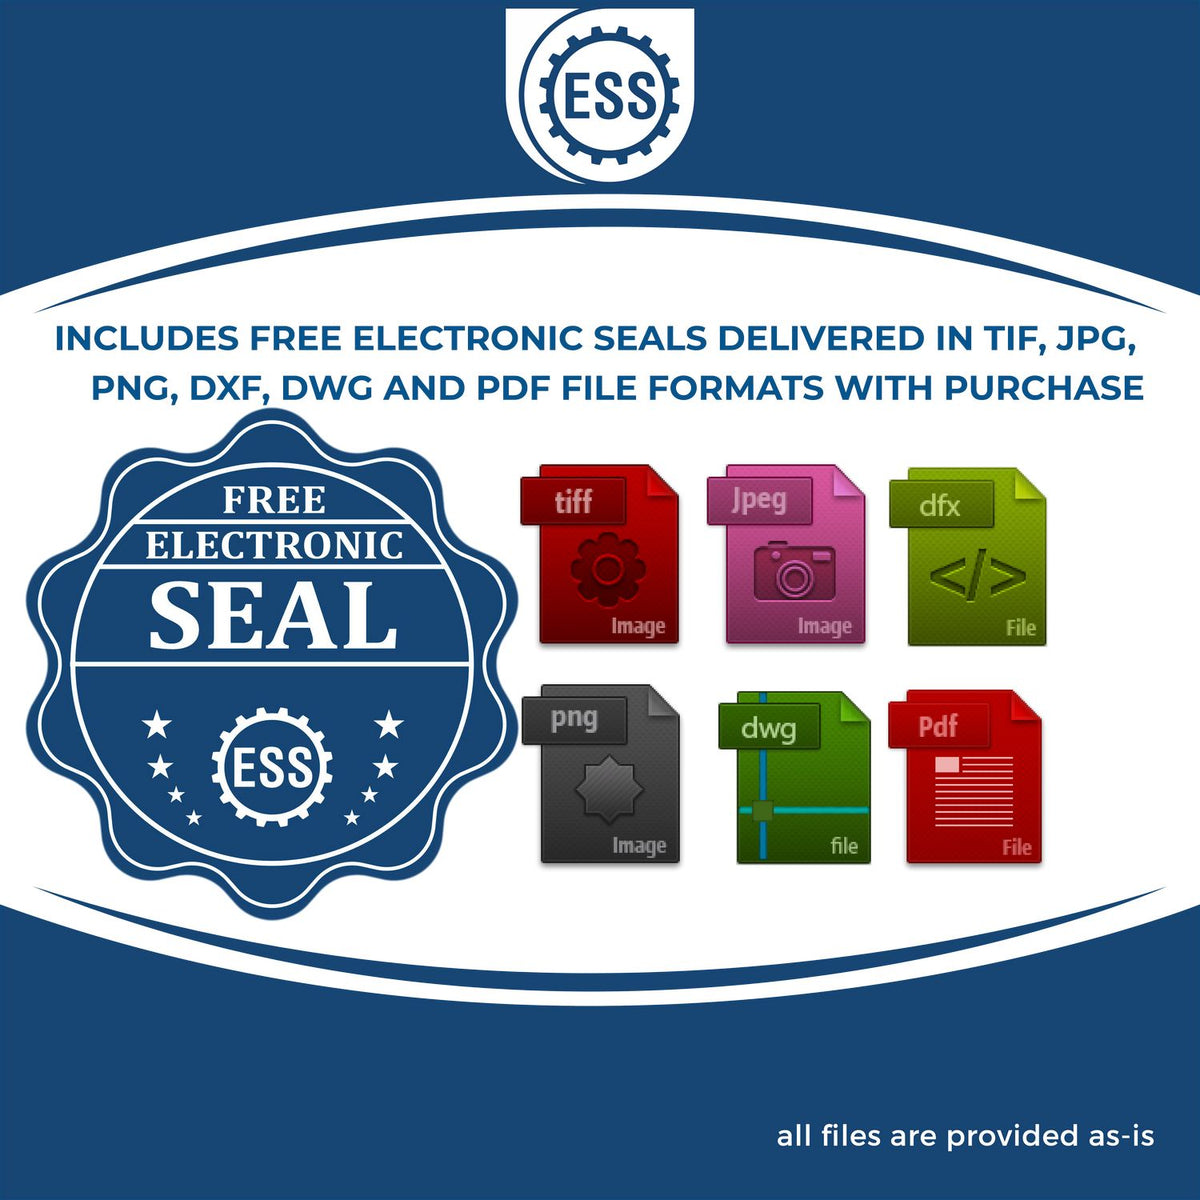 An infographic for the free electronic seal for the Soft New York Professional Geologist Seal illustrating the different file type icons such as DXF, DWG, TIF, JPG and PNG.